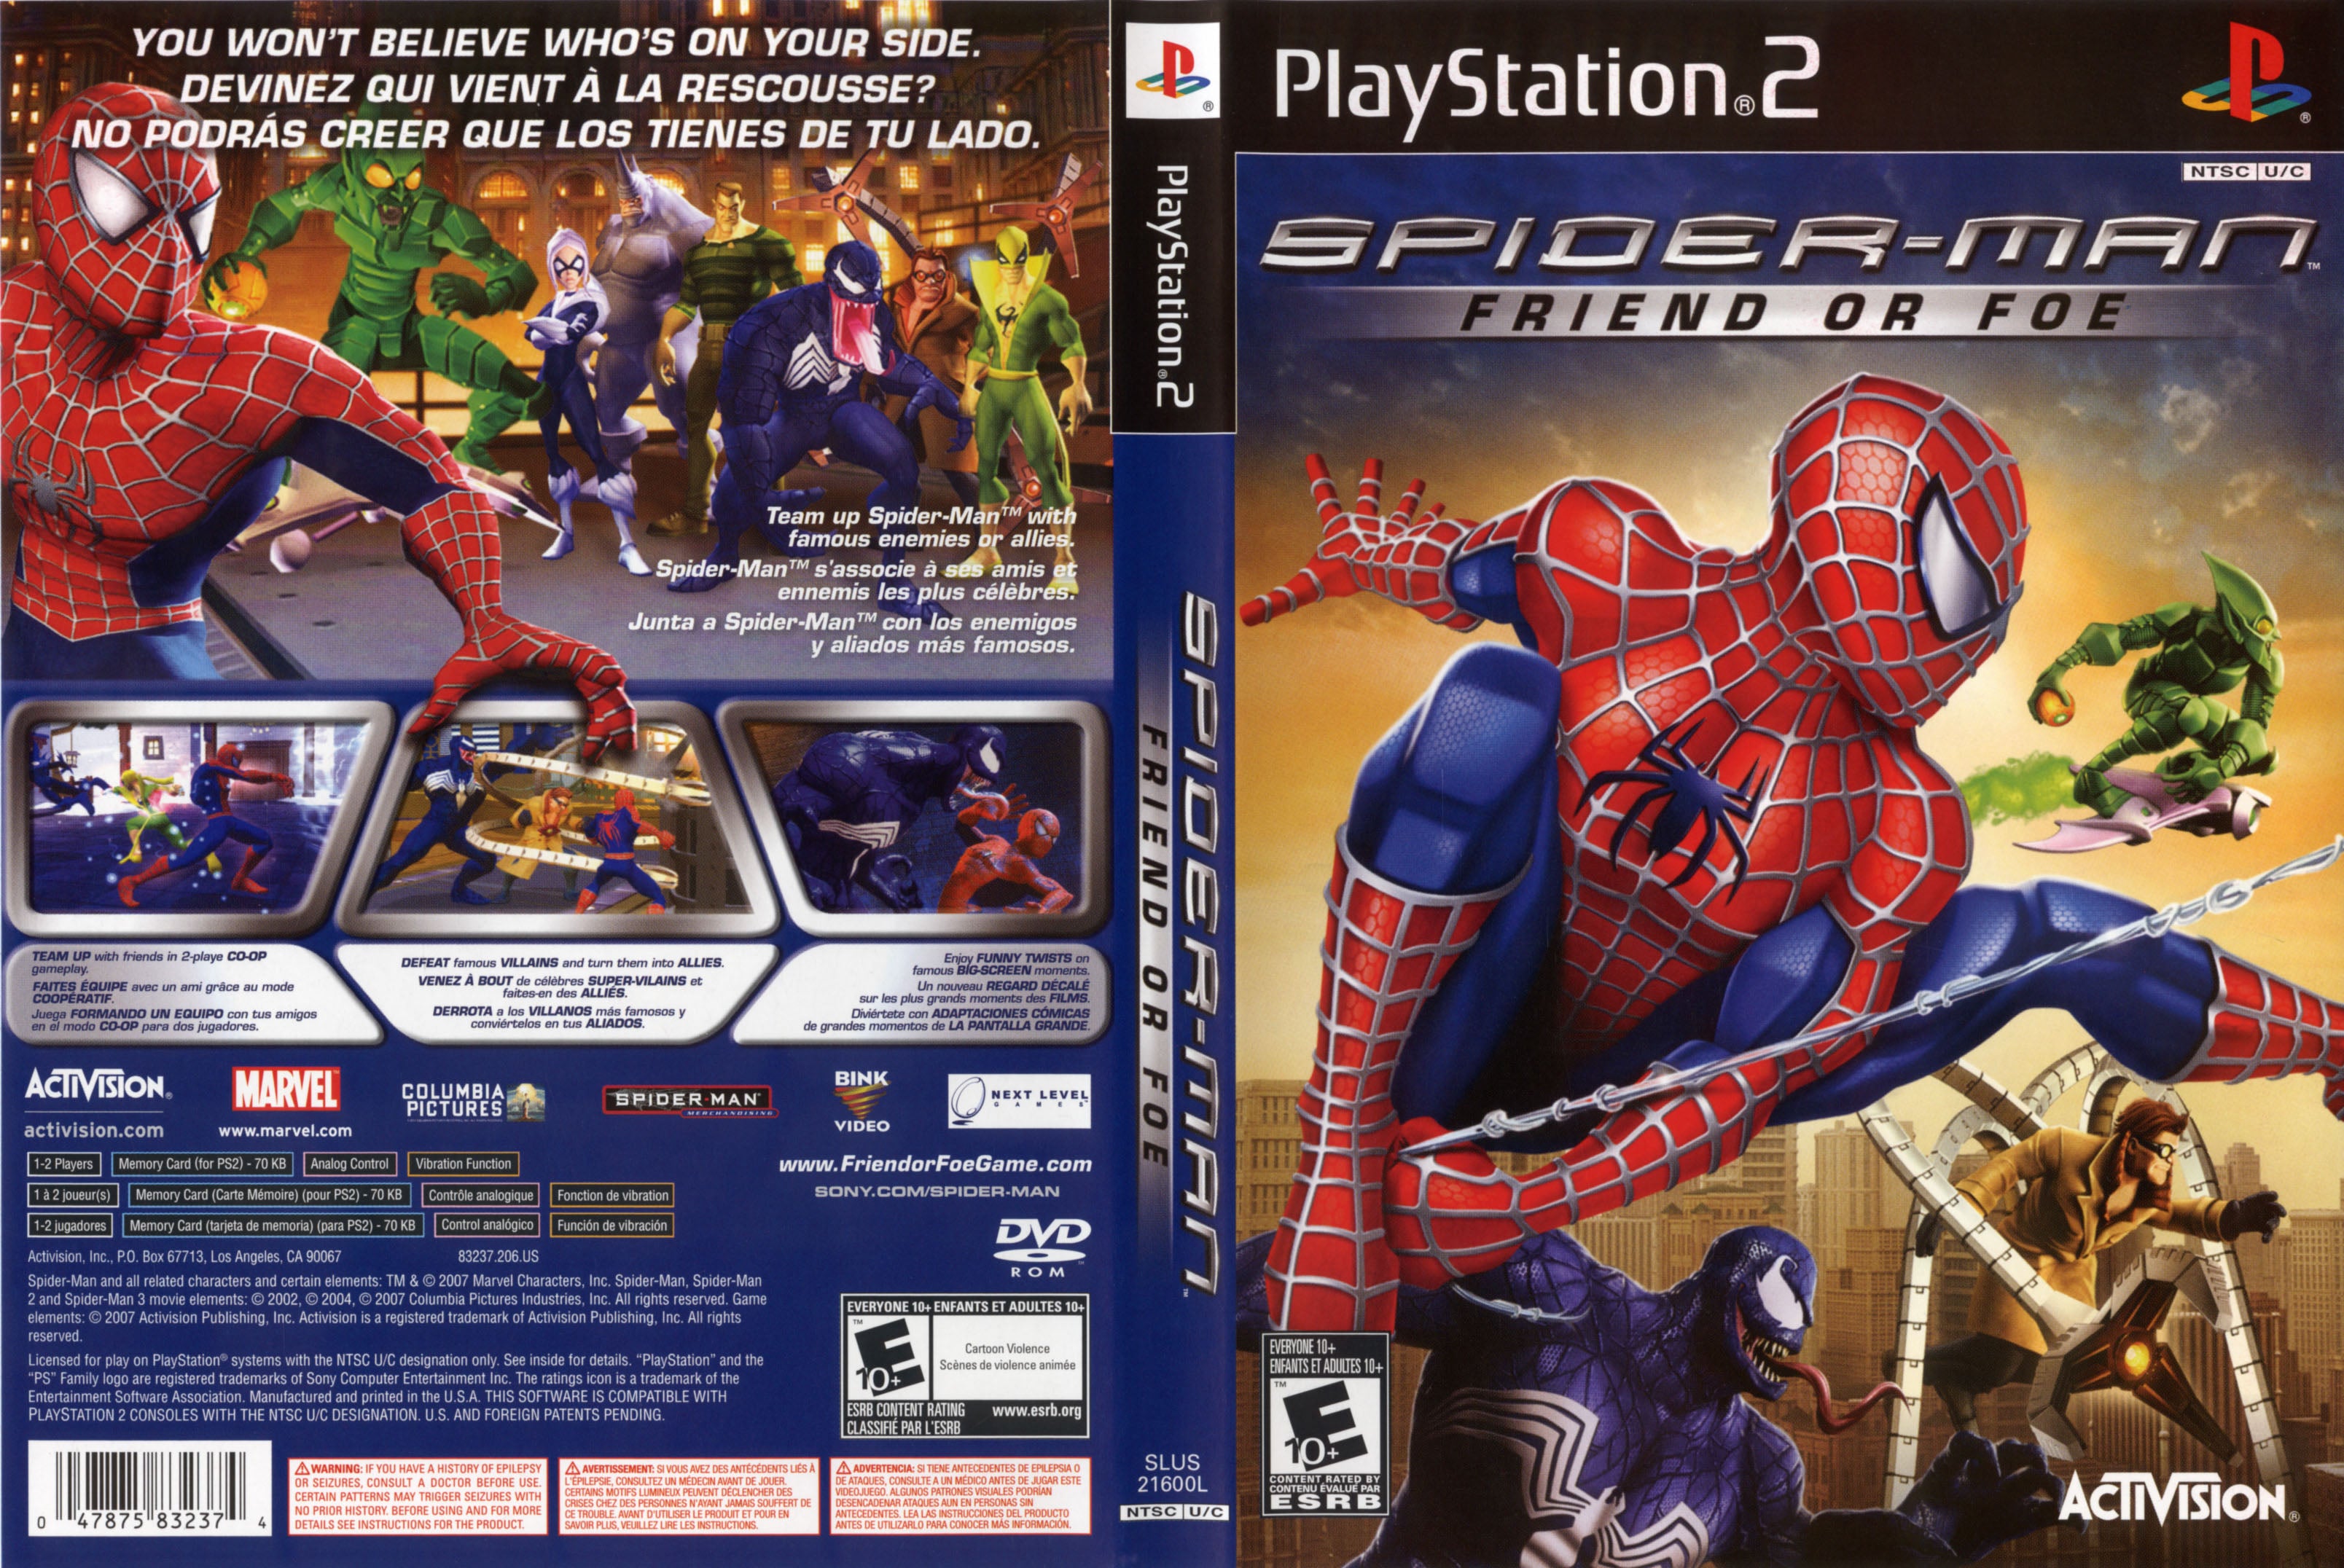 Just got some new old games especially happy about the Spiderman Games 🥳 :  r/ps2